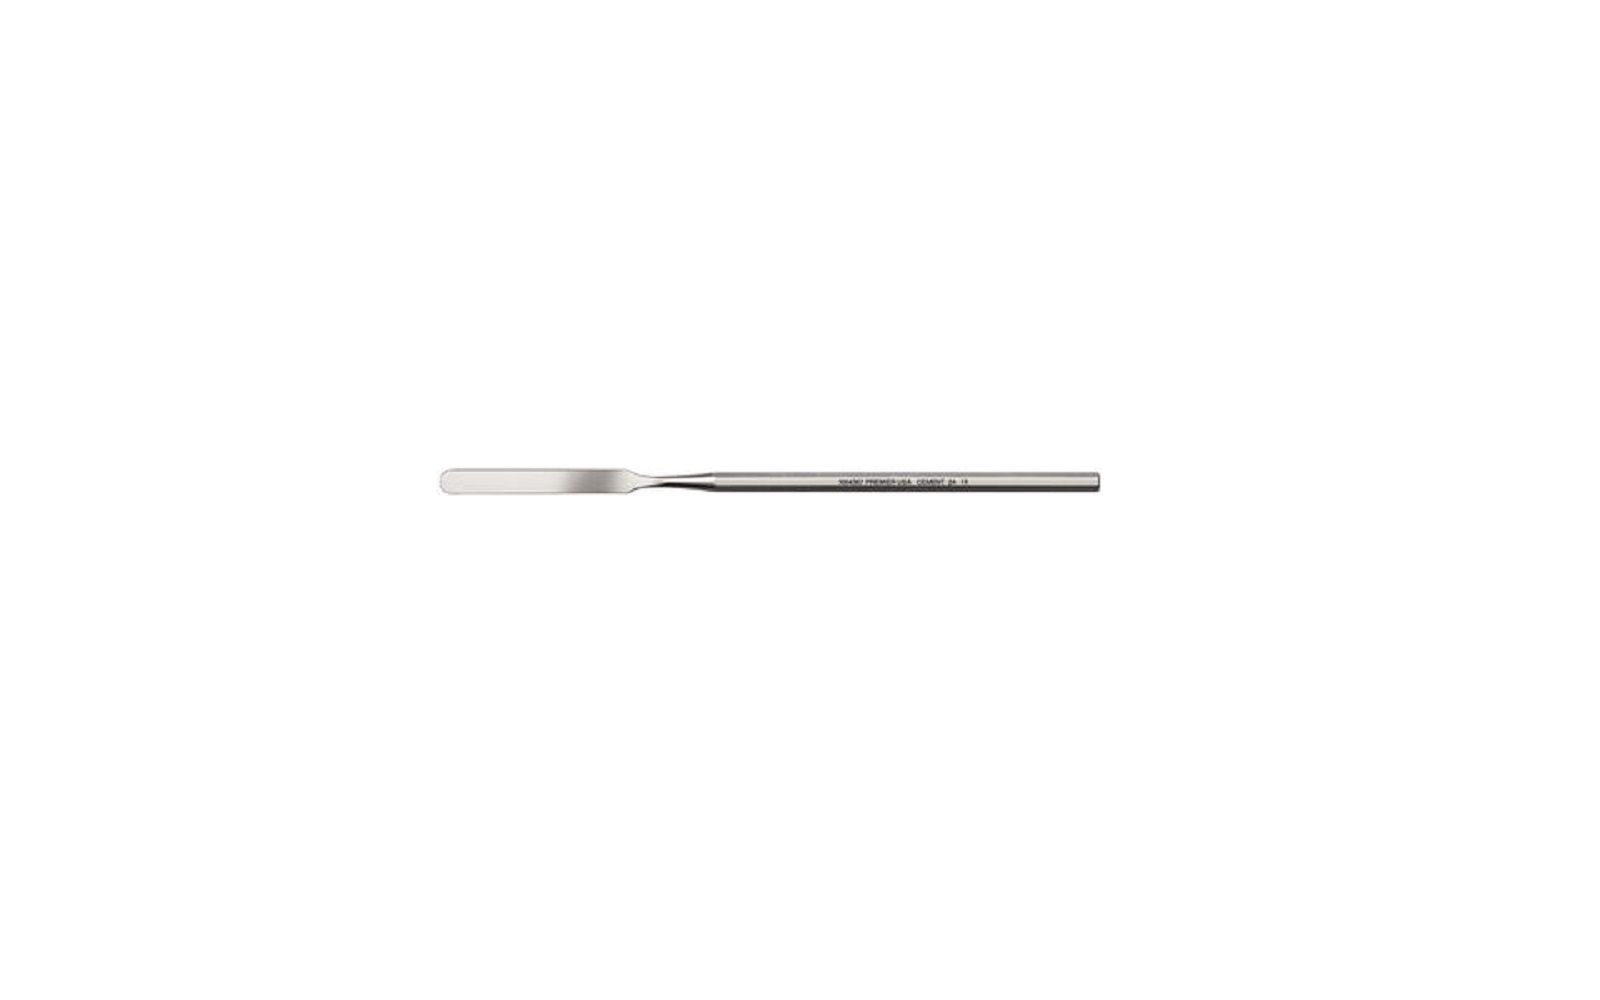 Cement spatulas – 24, single end, stainless steel